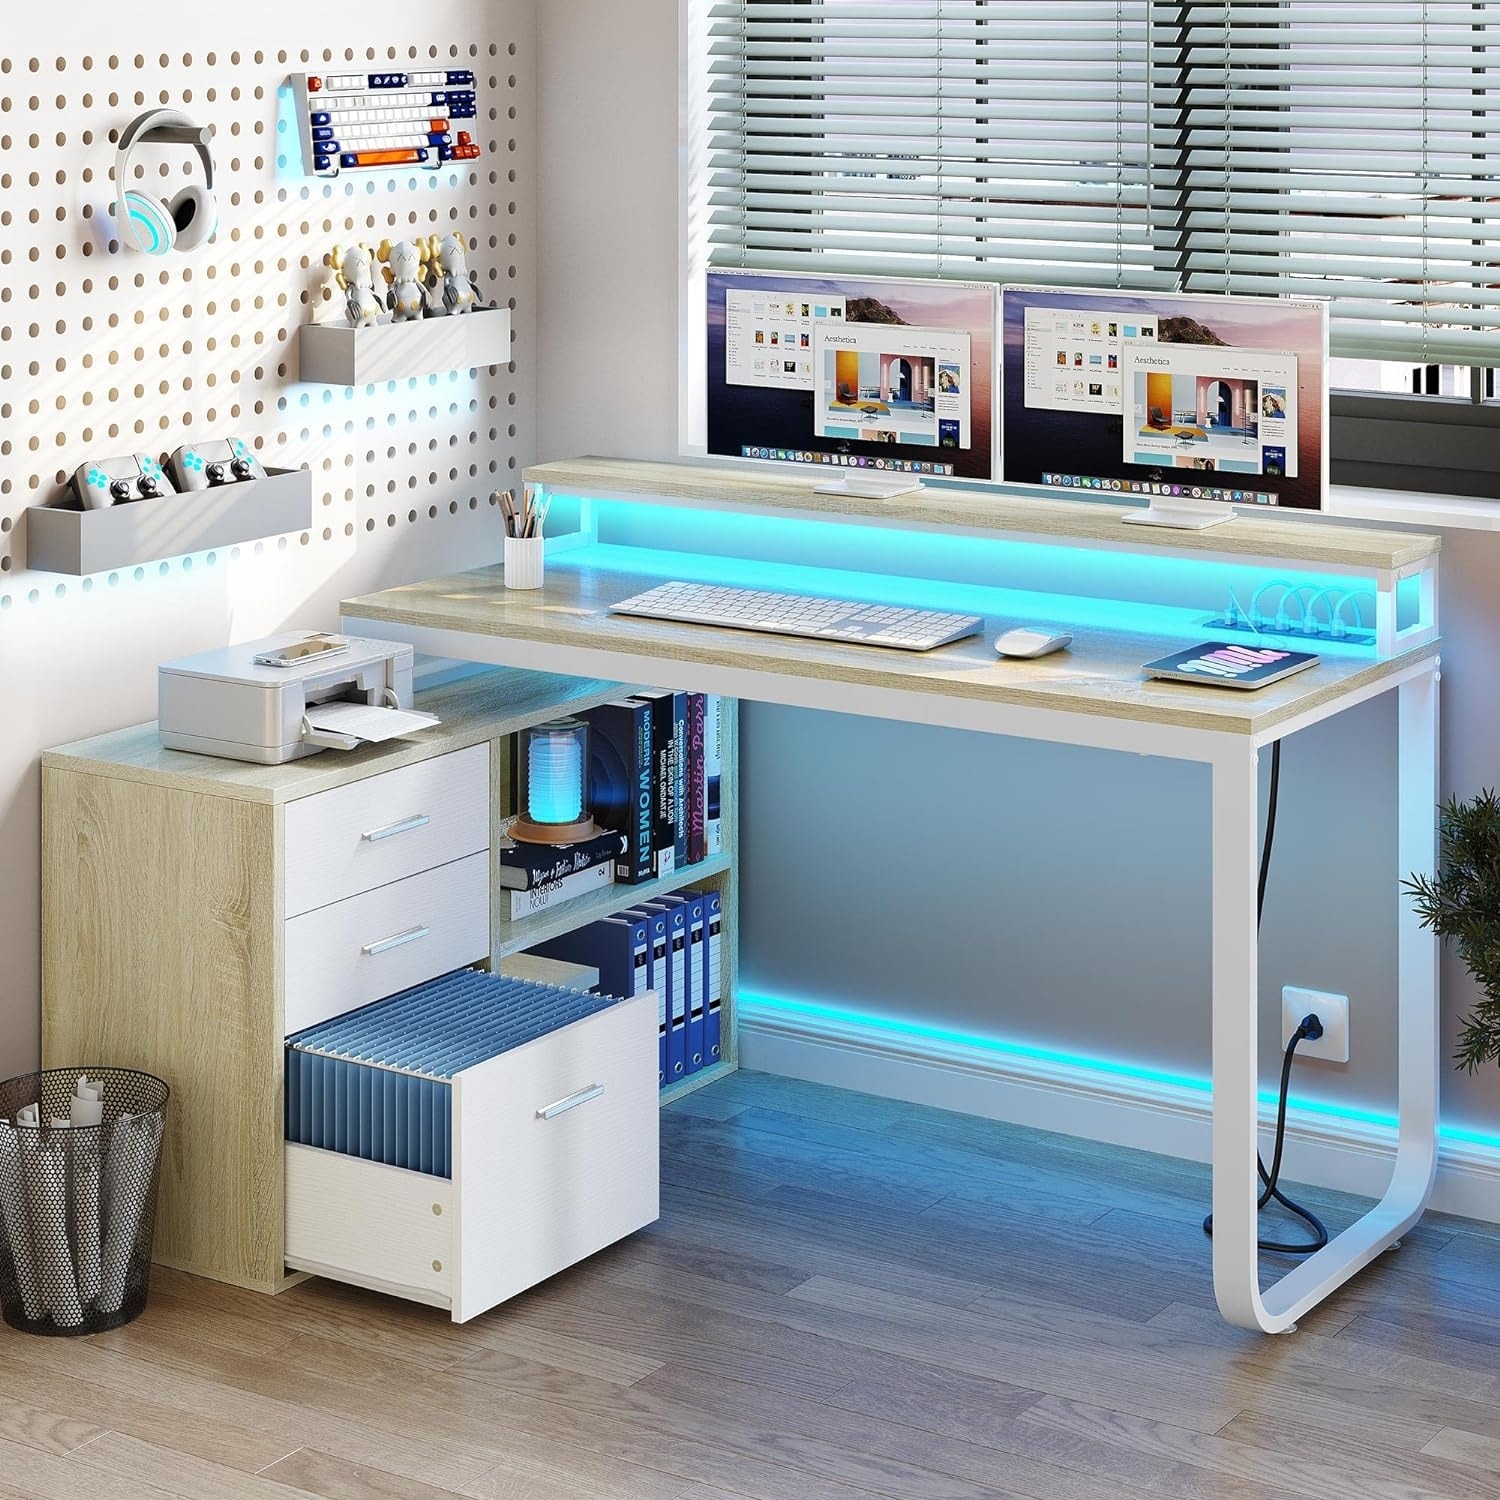 https://ak1.ostkcdn.com/images/products/is/images/direct/1783ee7e177b7da683234e200776e5a7538f43e7/55-Inch-L-shaped-Desk-with-Power-Outlets-and-LED-Lights-Computer-Corner-Desk-with-File-Cabinet-Monitor-Stand.jpg